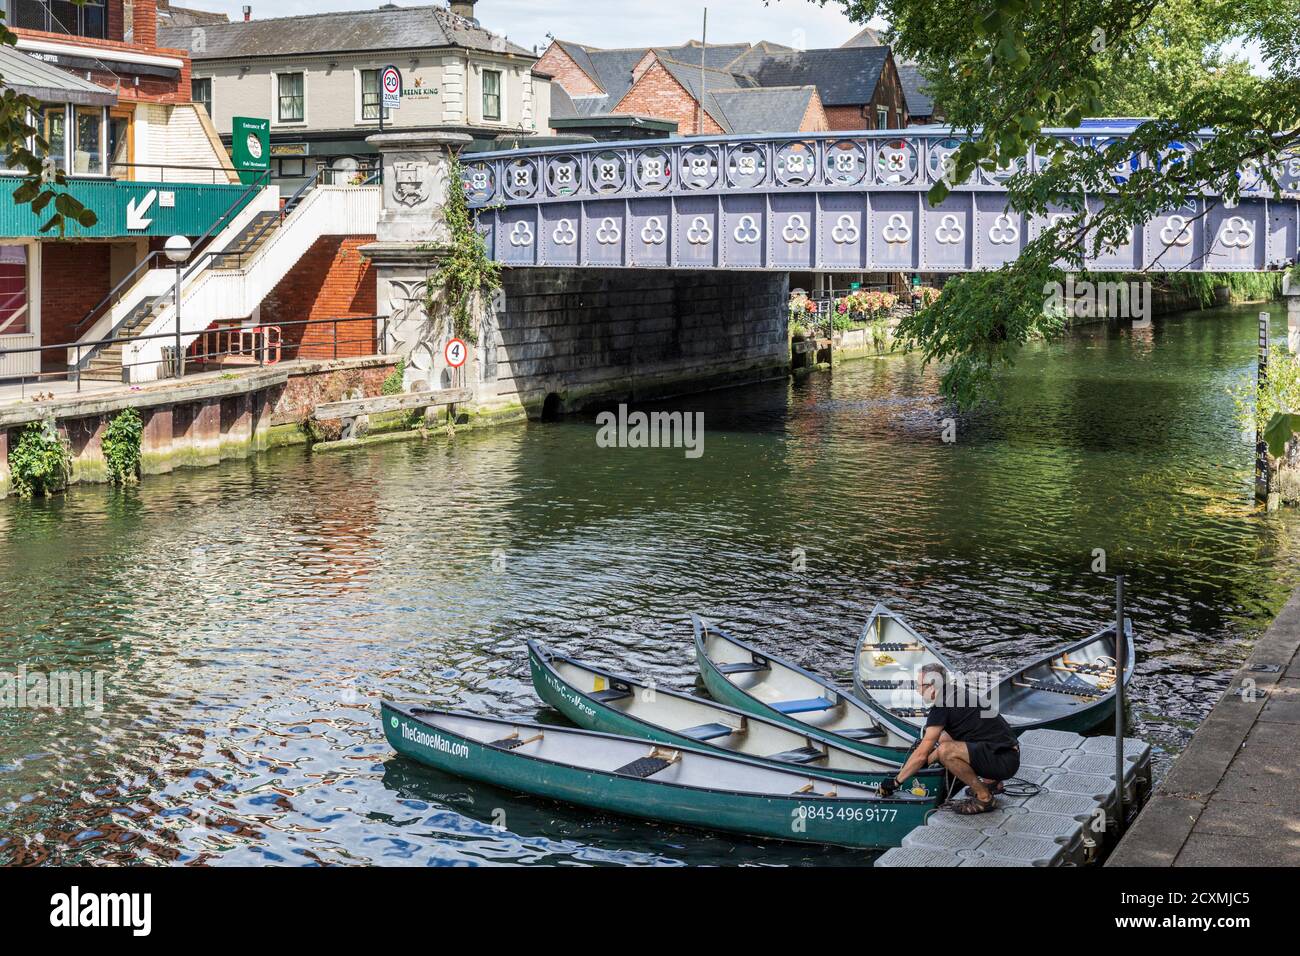 The Canoe man is located on the River Wensum near the Foundry Bridge at Norwich, Norfolk, England. Stock Photo